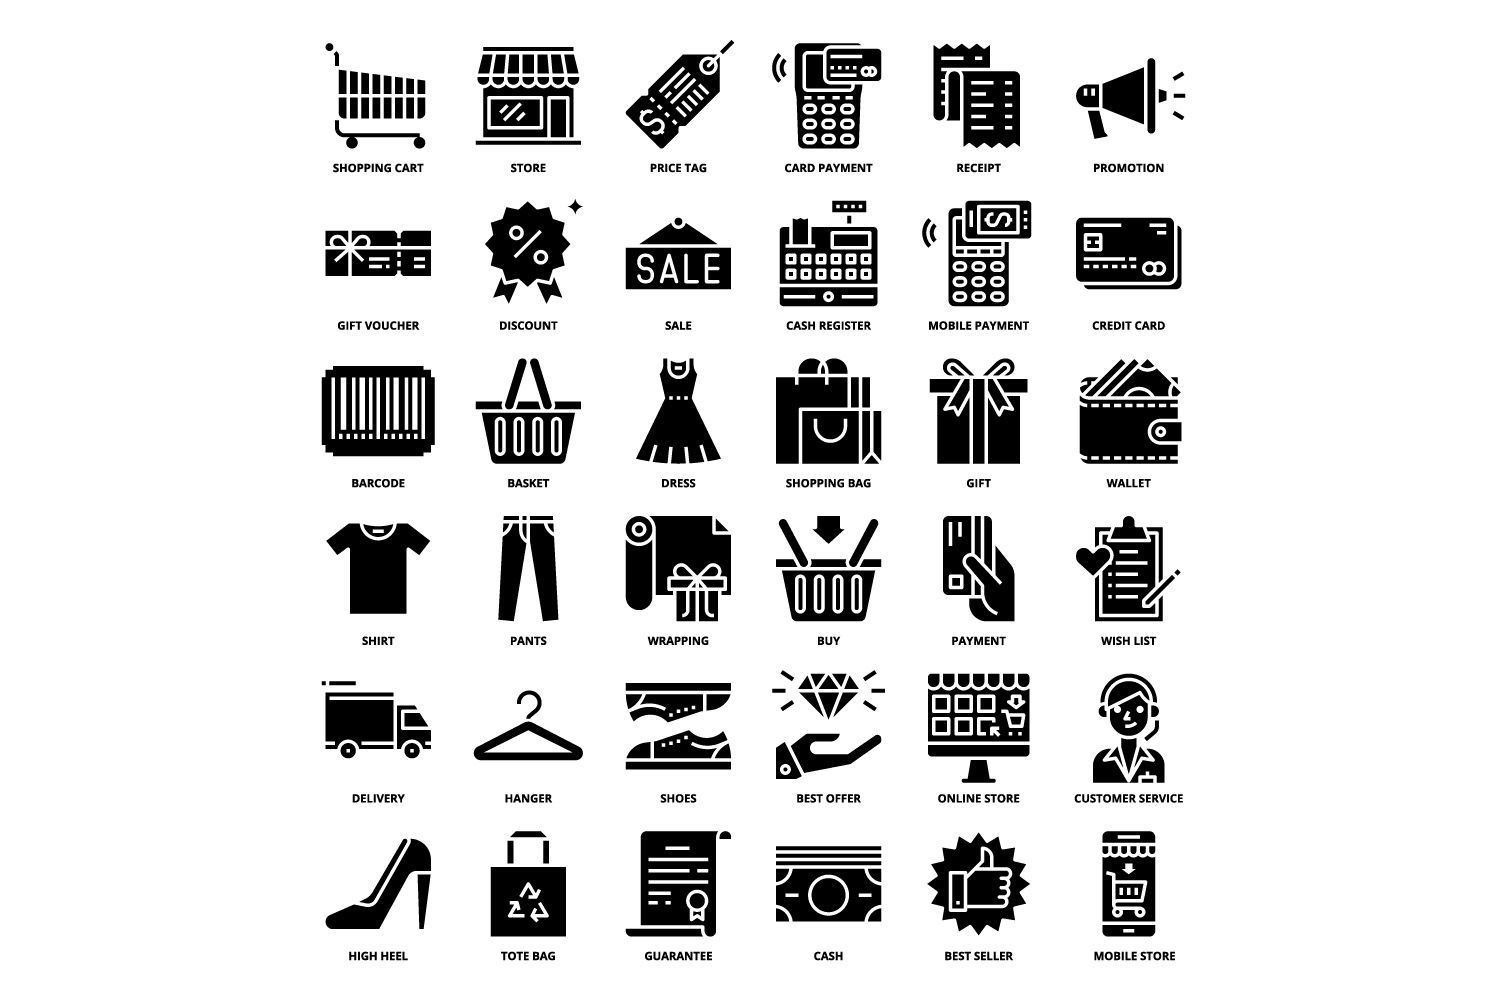 Black and white image of various types of items.